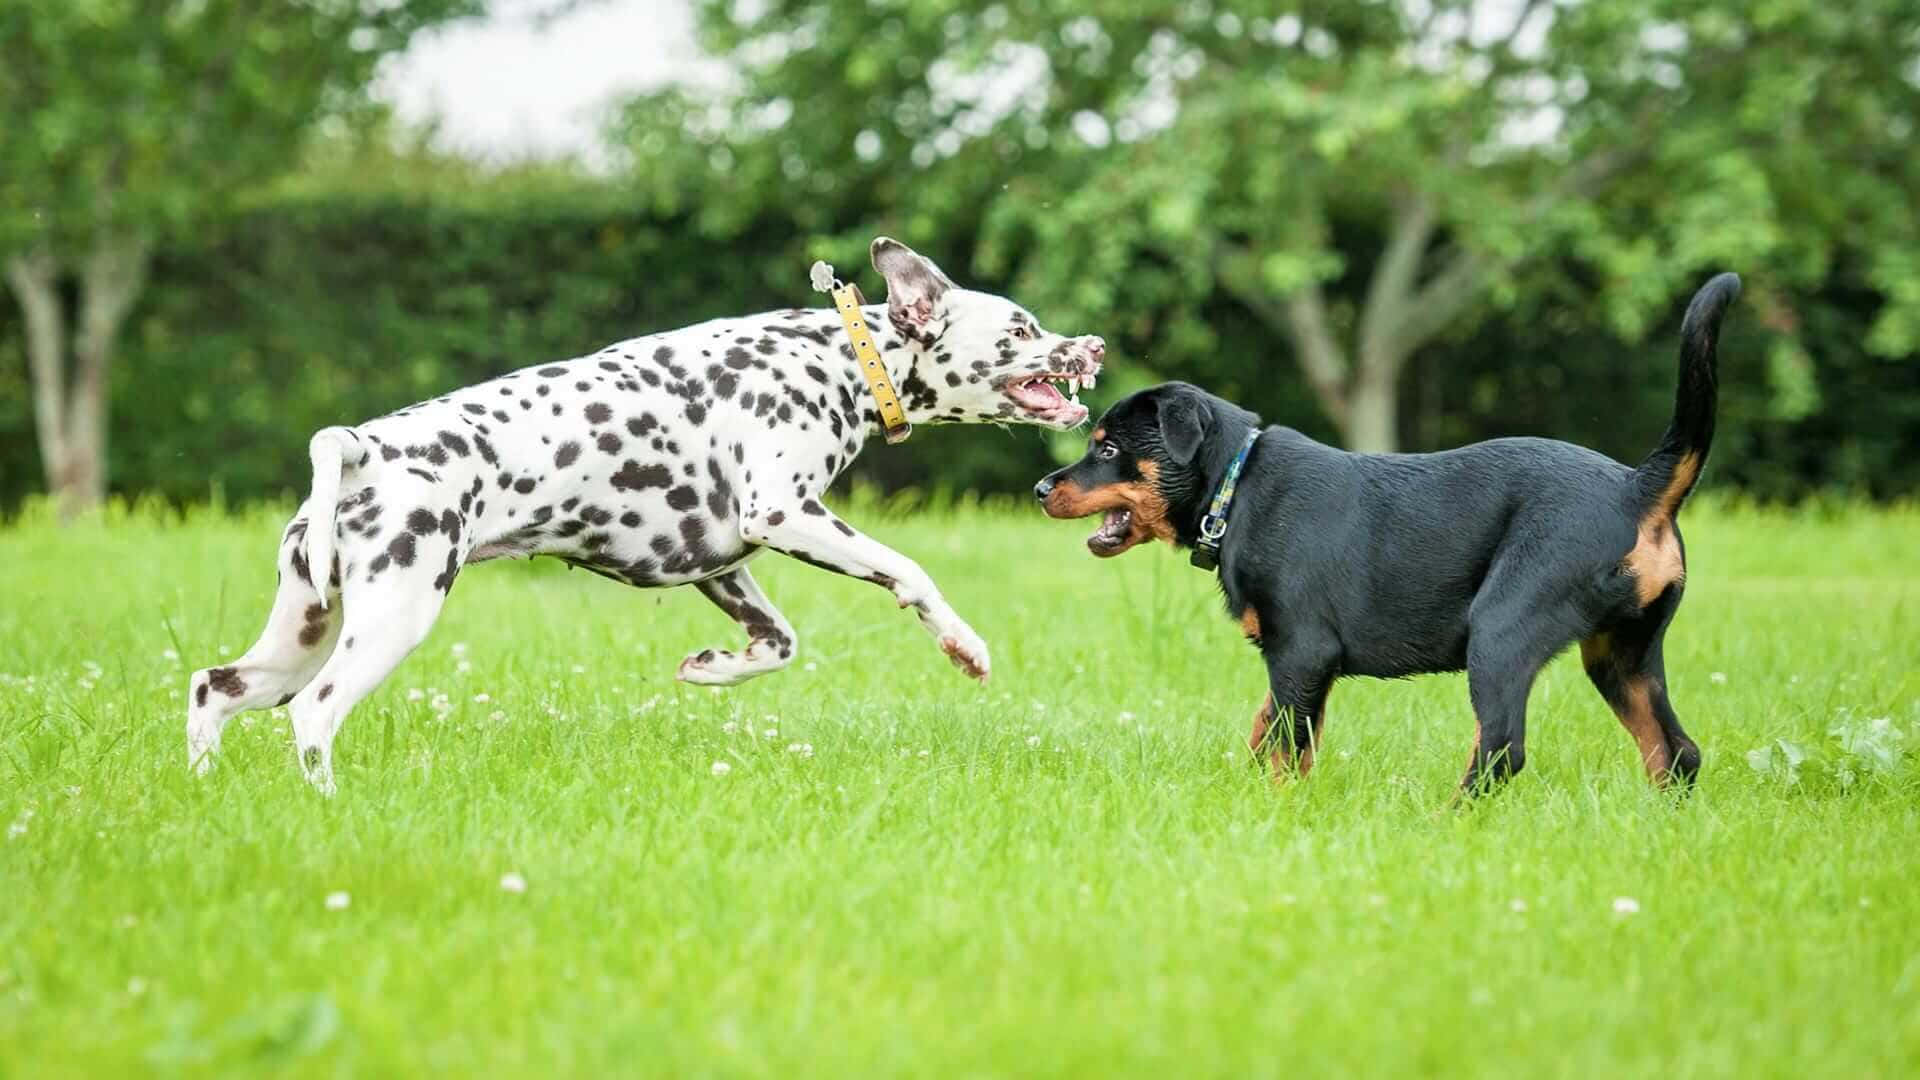 A Confronting View Of A Fearsome Dog Displaying Aggressive Behaviour. Wallpaper